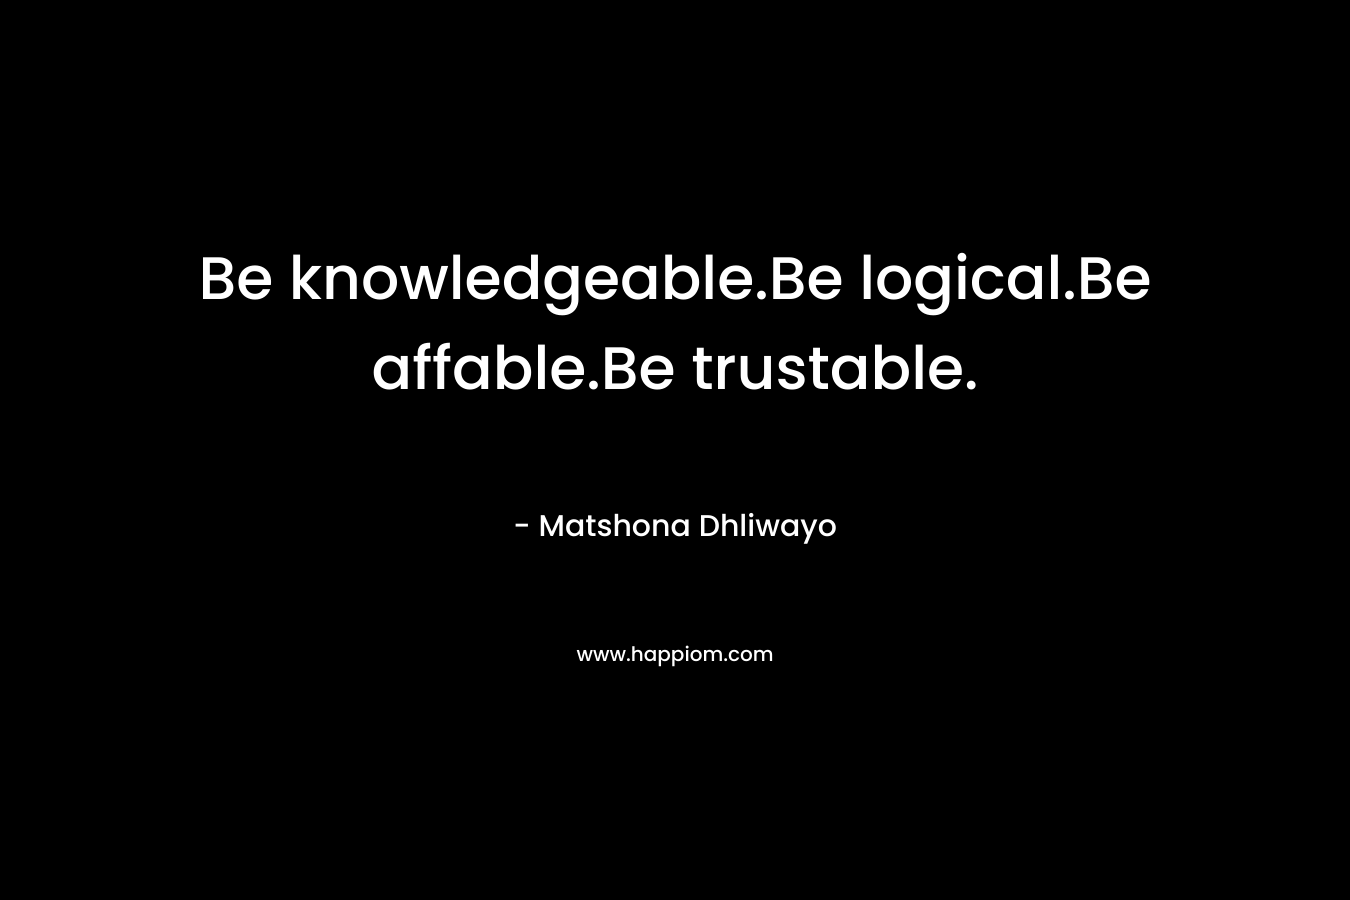 Be knowledgeable.Be logical.Be affable.Be trustable.